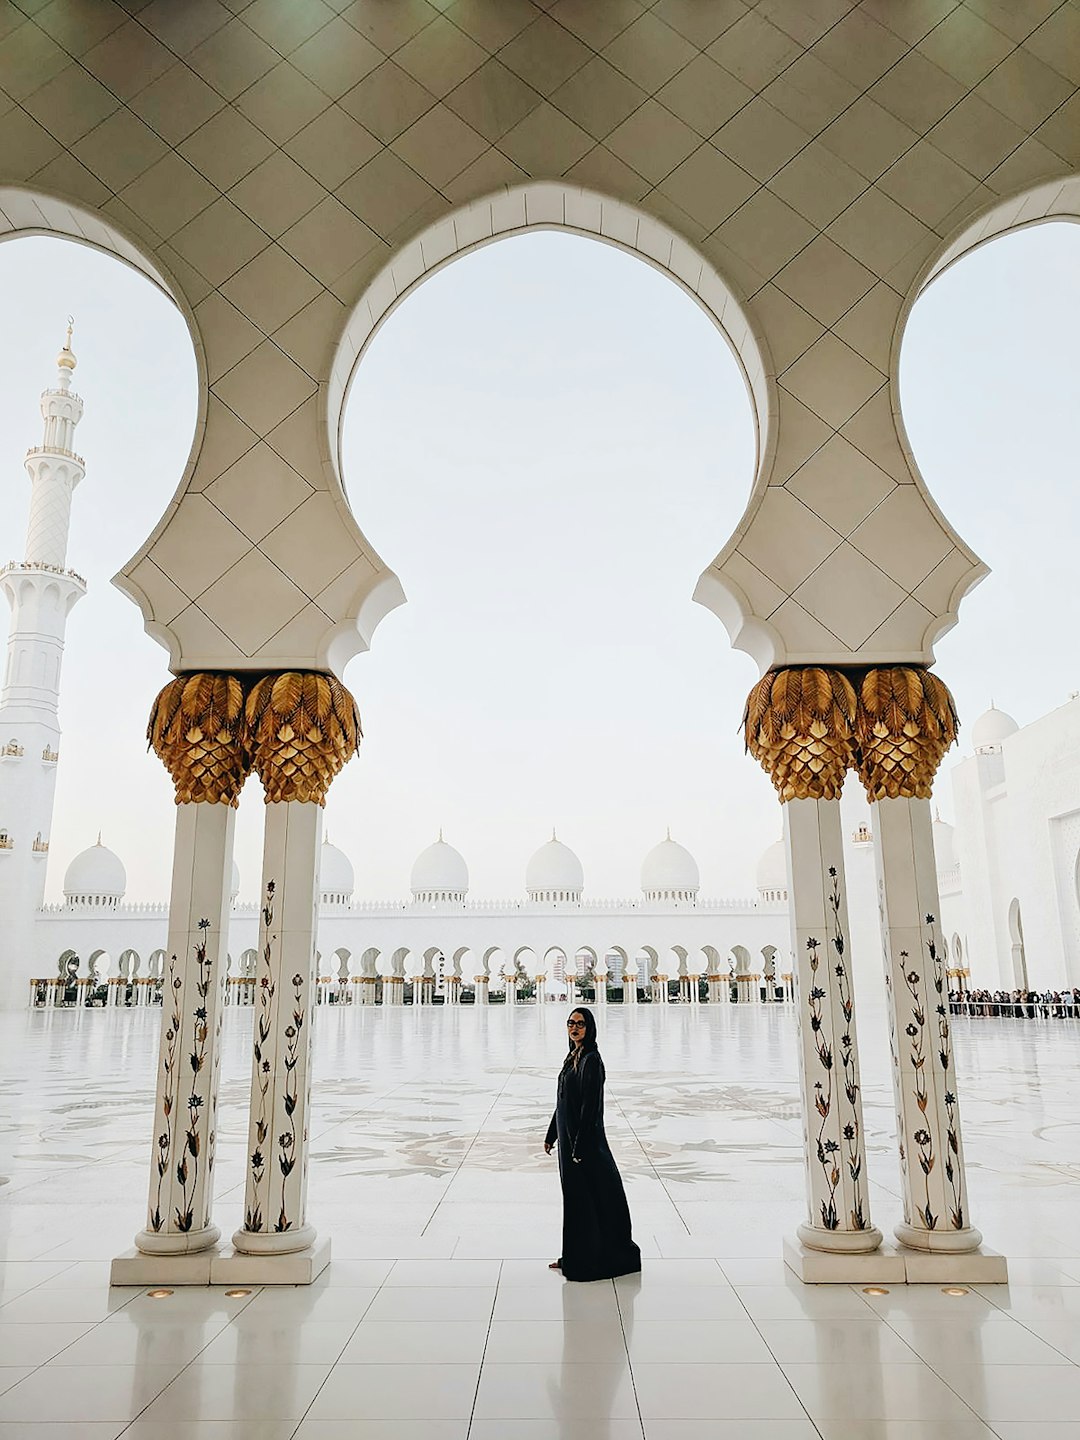 Travel Tips and Stories of Abu Dhabi in United Arab Emirates